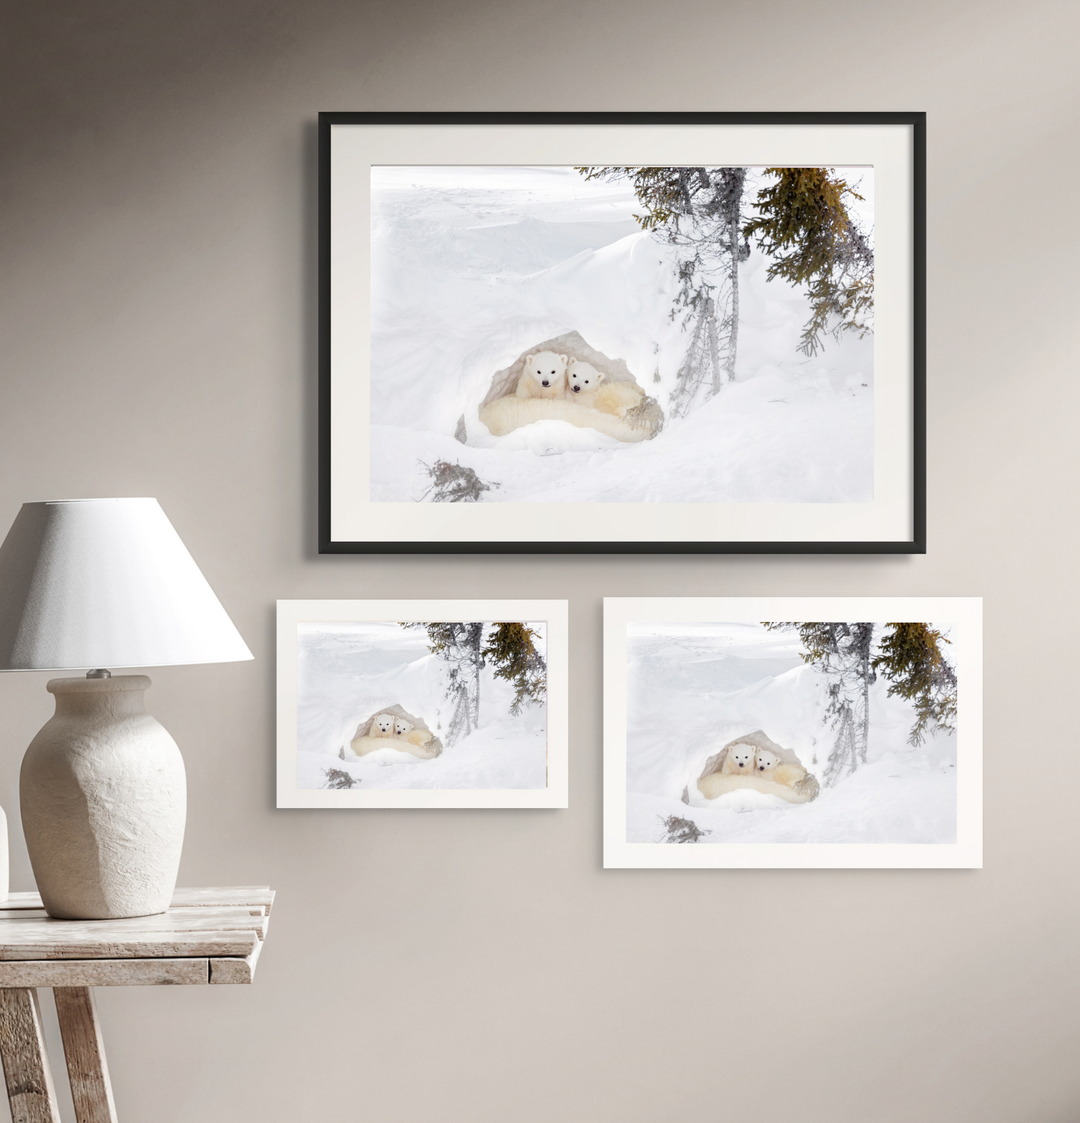 A Cozy Snow Den by Ruth Elwell-Steck